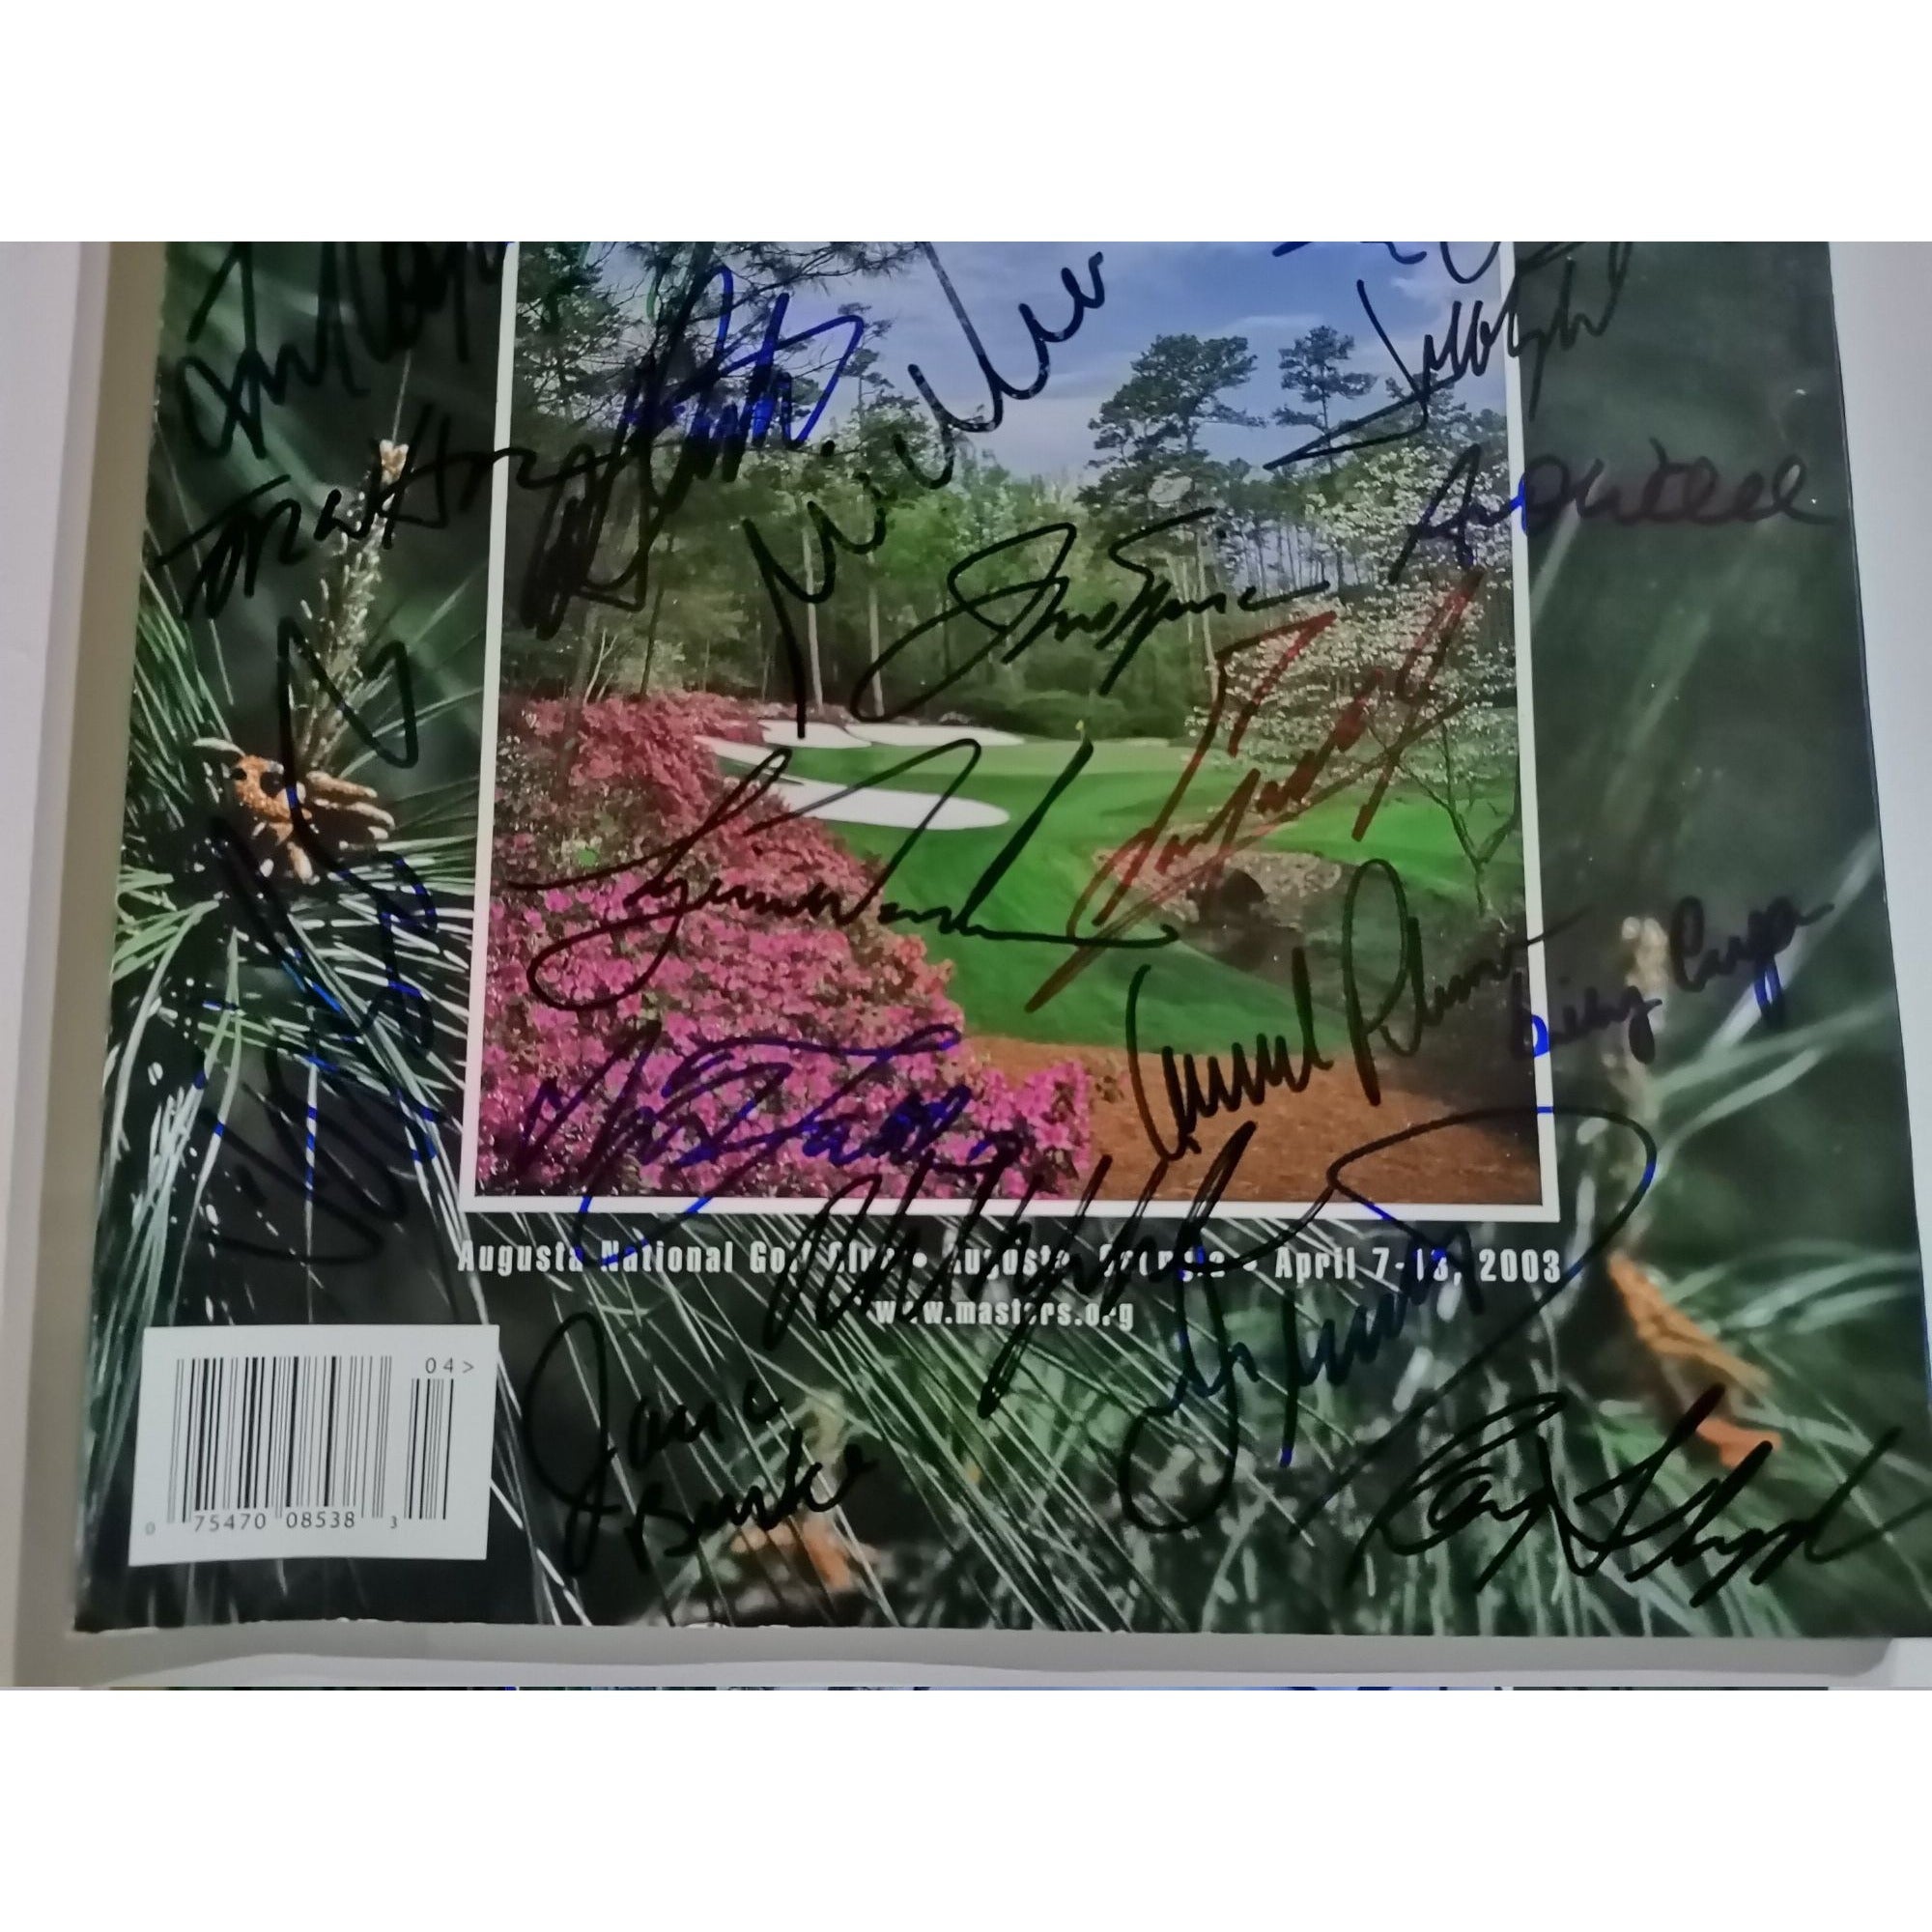 Tiger Woods Arnold Palmer Jack Nicklaus 20 Masters champions signed program with proof